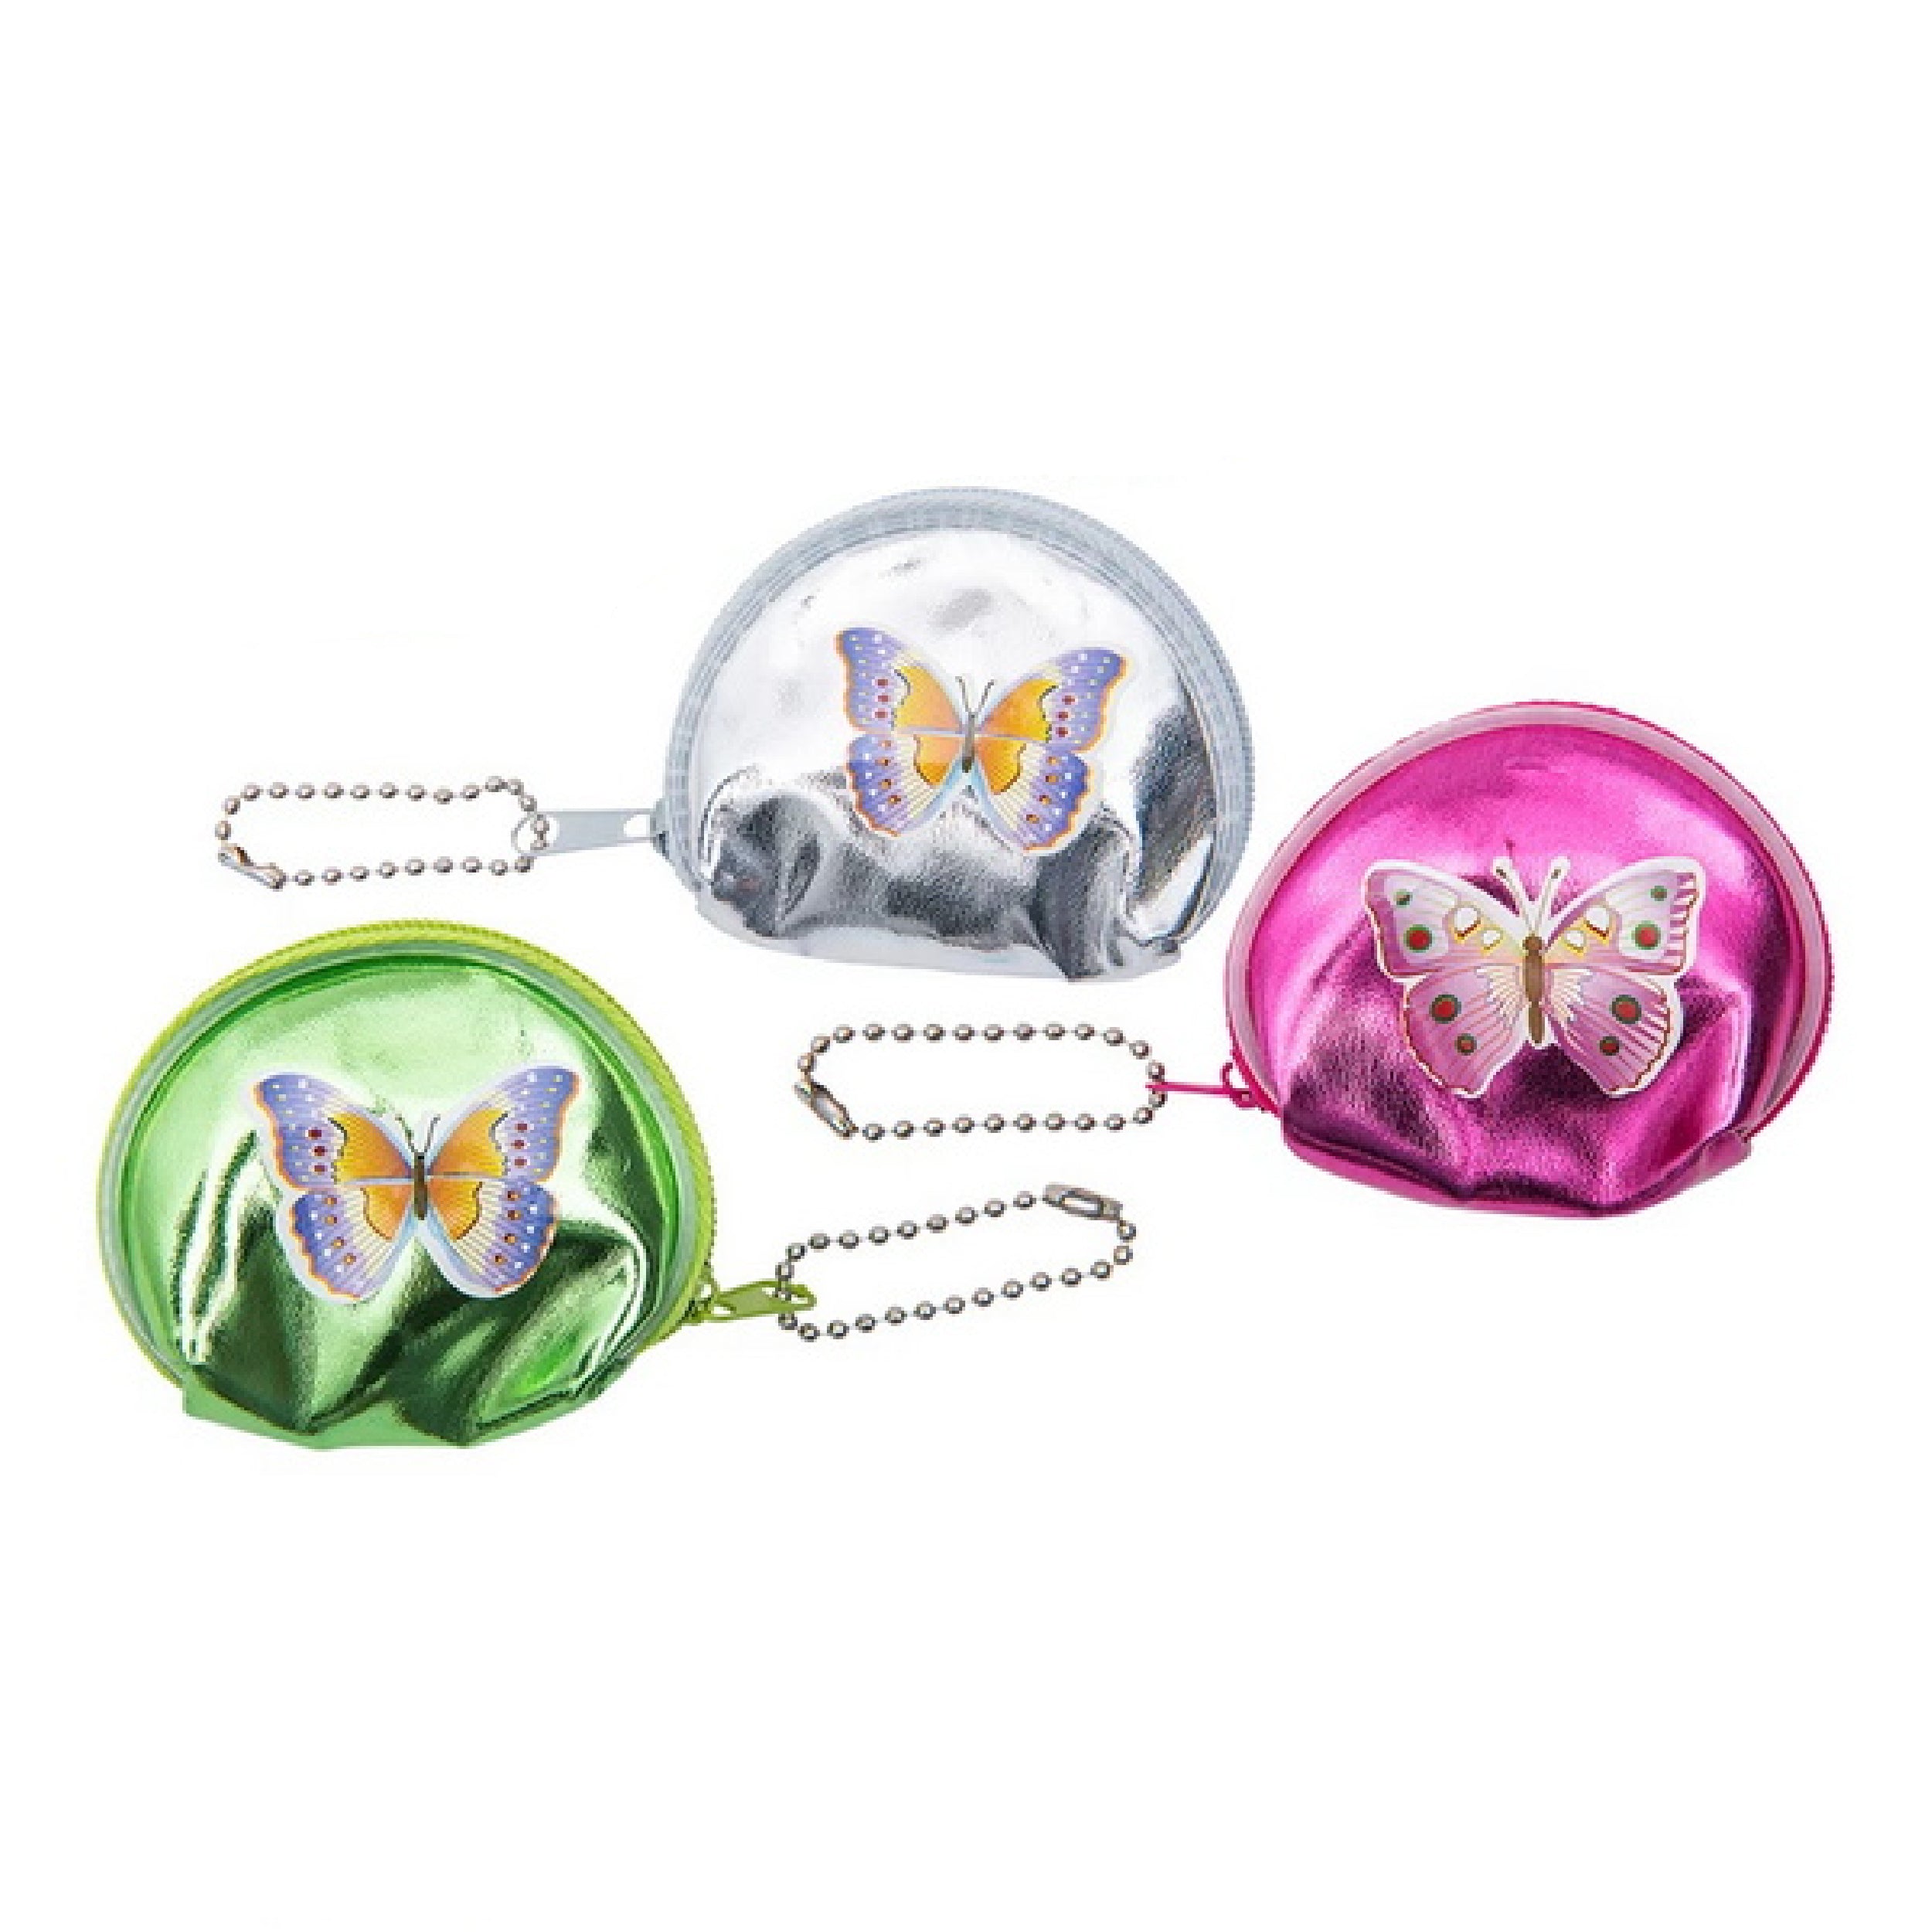 Wholesale Colorful 2.75" Butterfly Design Zipper Coin Purse For Women (Sold by DZ)